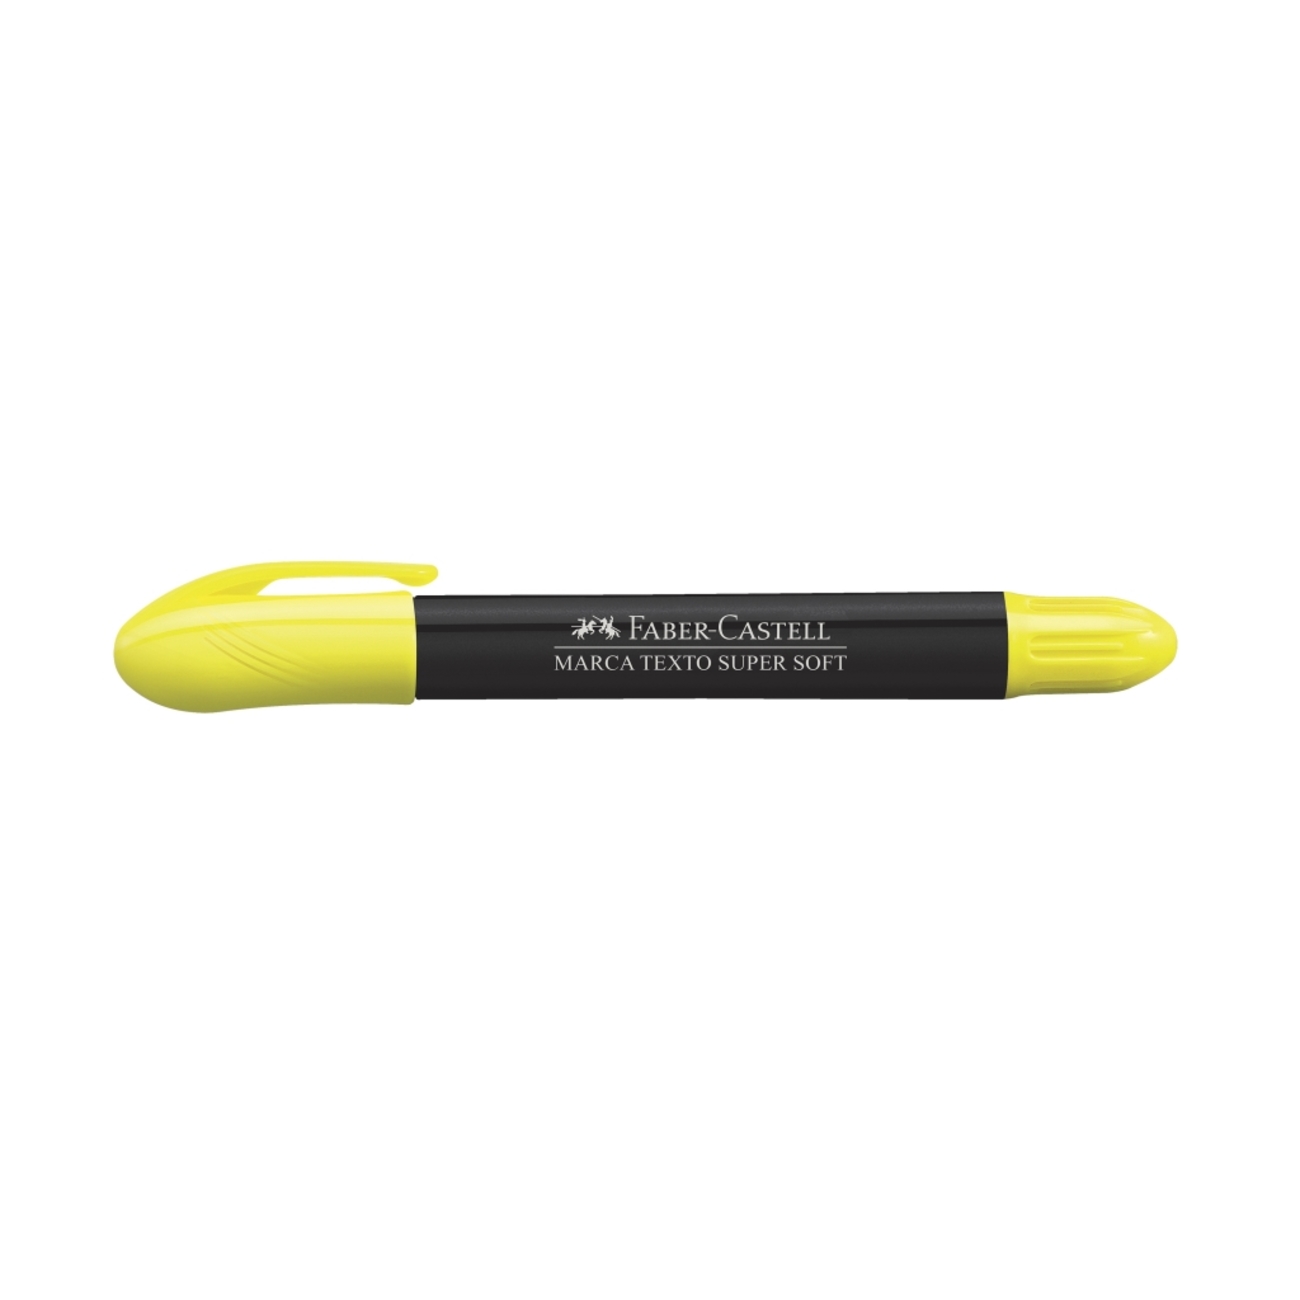 Marca Texto Faber-Castell SuperSoft Gel Amarelo 1 Cx C/ 24 Ctl